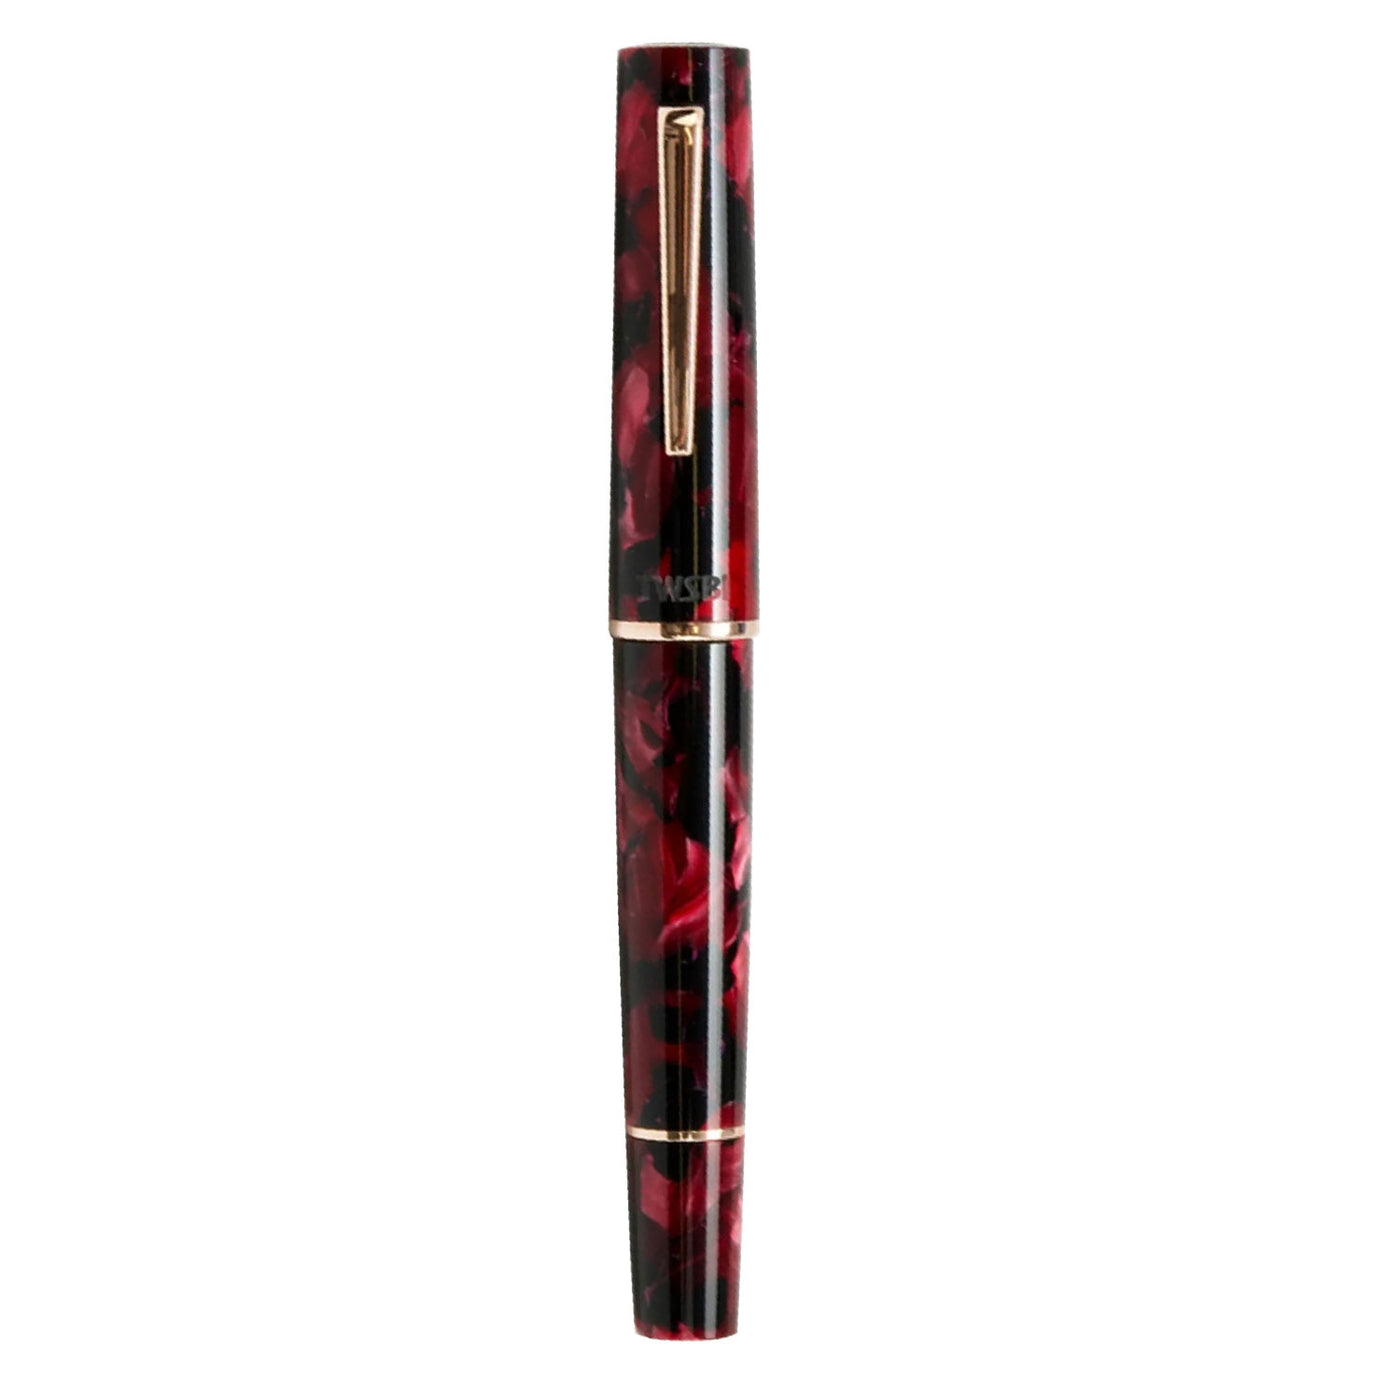 TWSBI Draco Fountain Pen - Deep Red (Limited Edition) 4